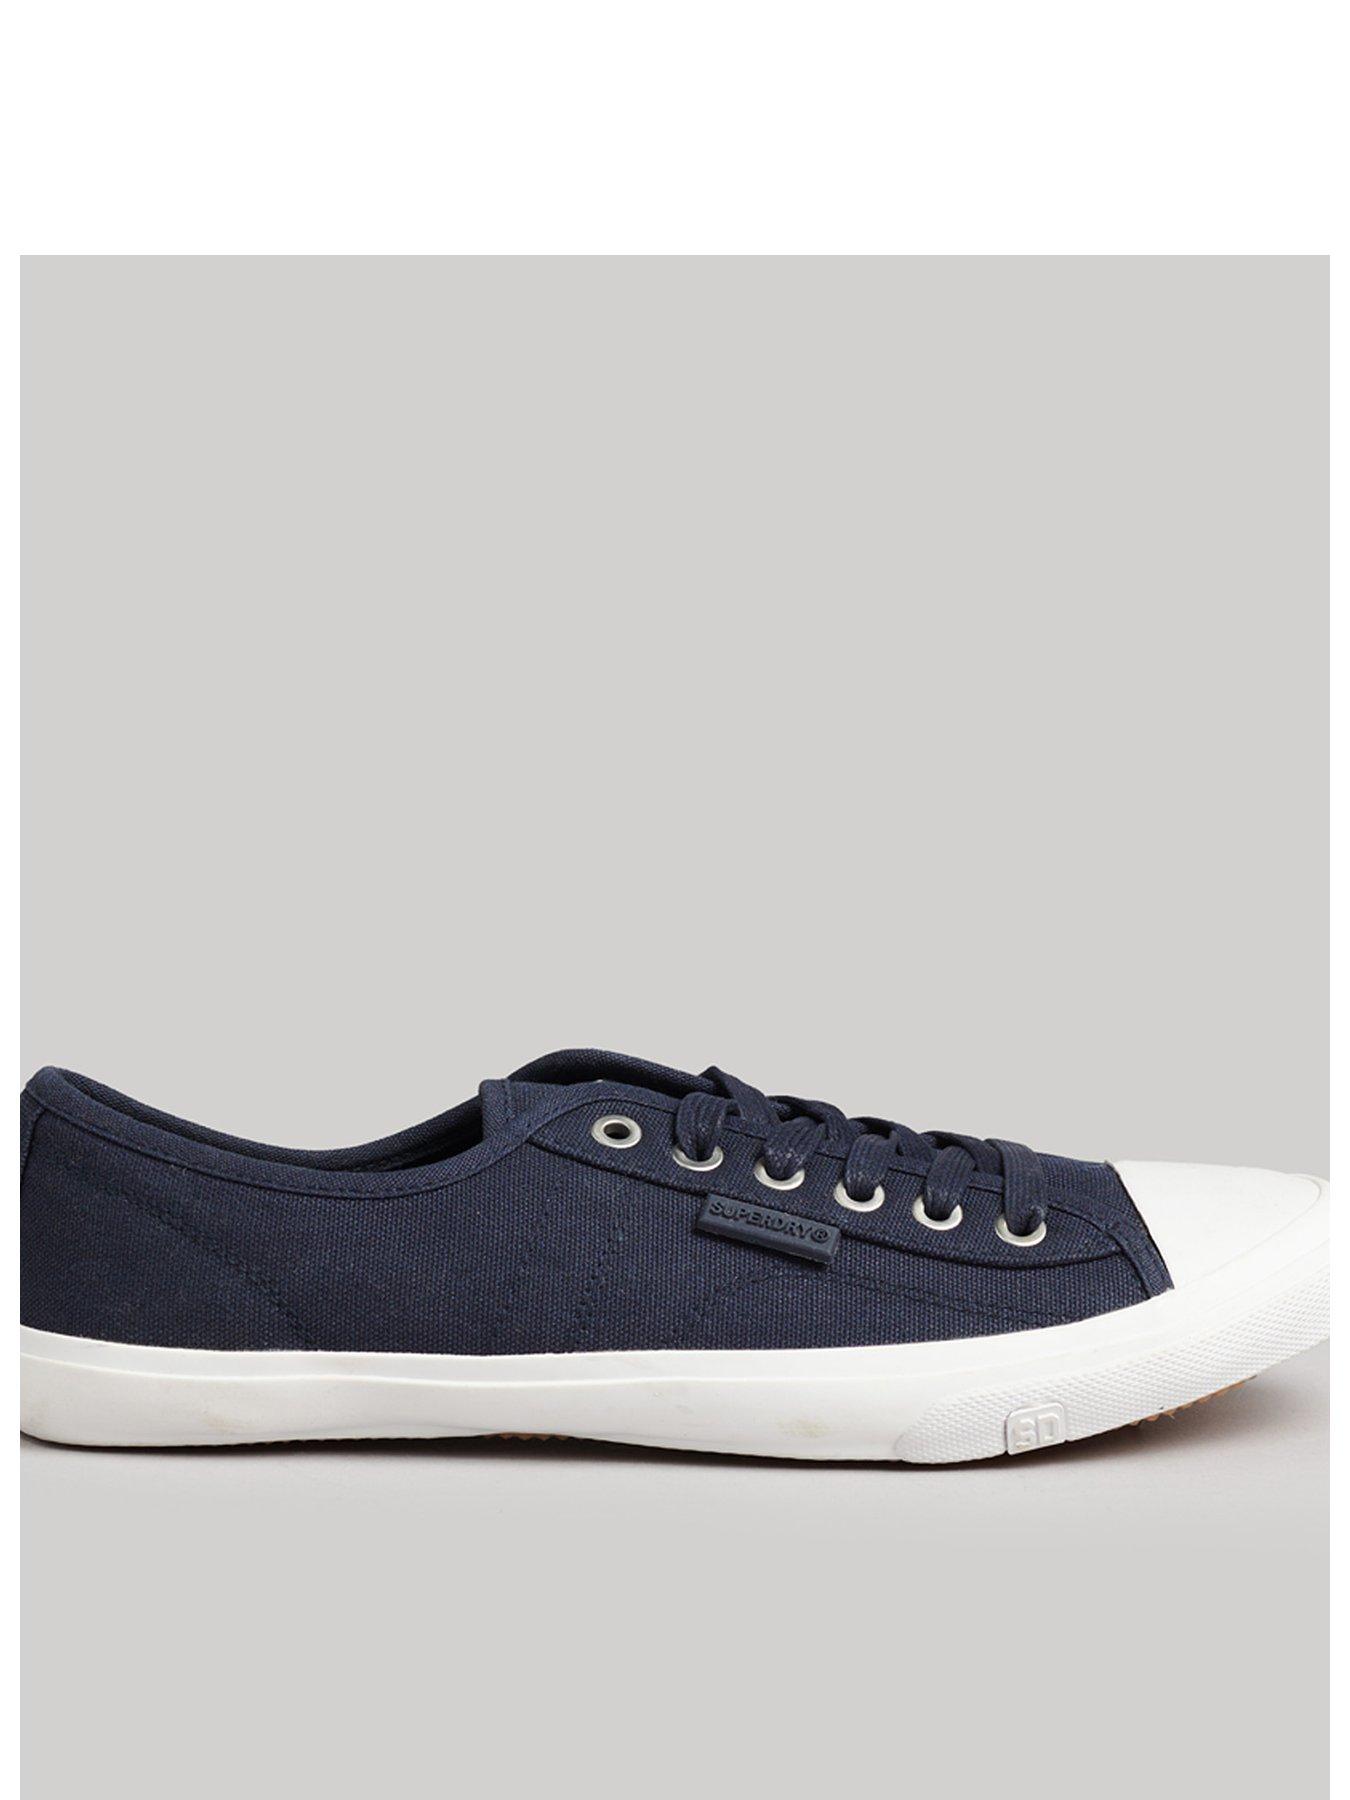 Superdry Low Pro Trainers - Navy | littlewoods.com